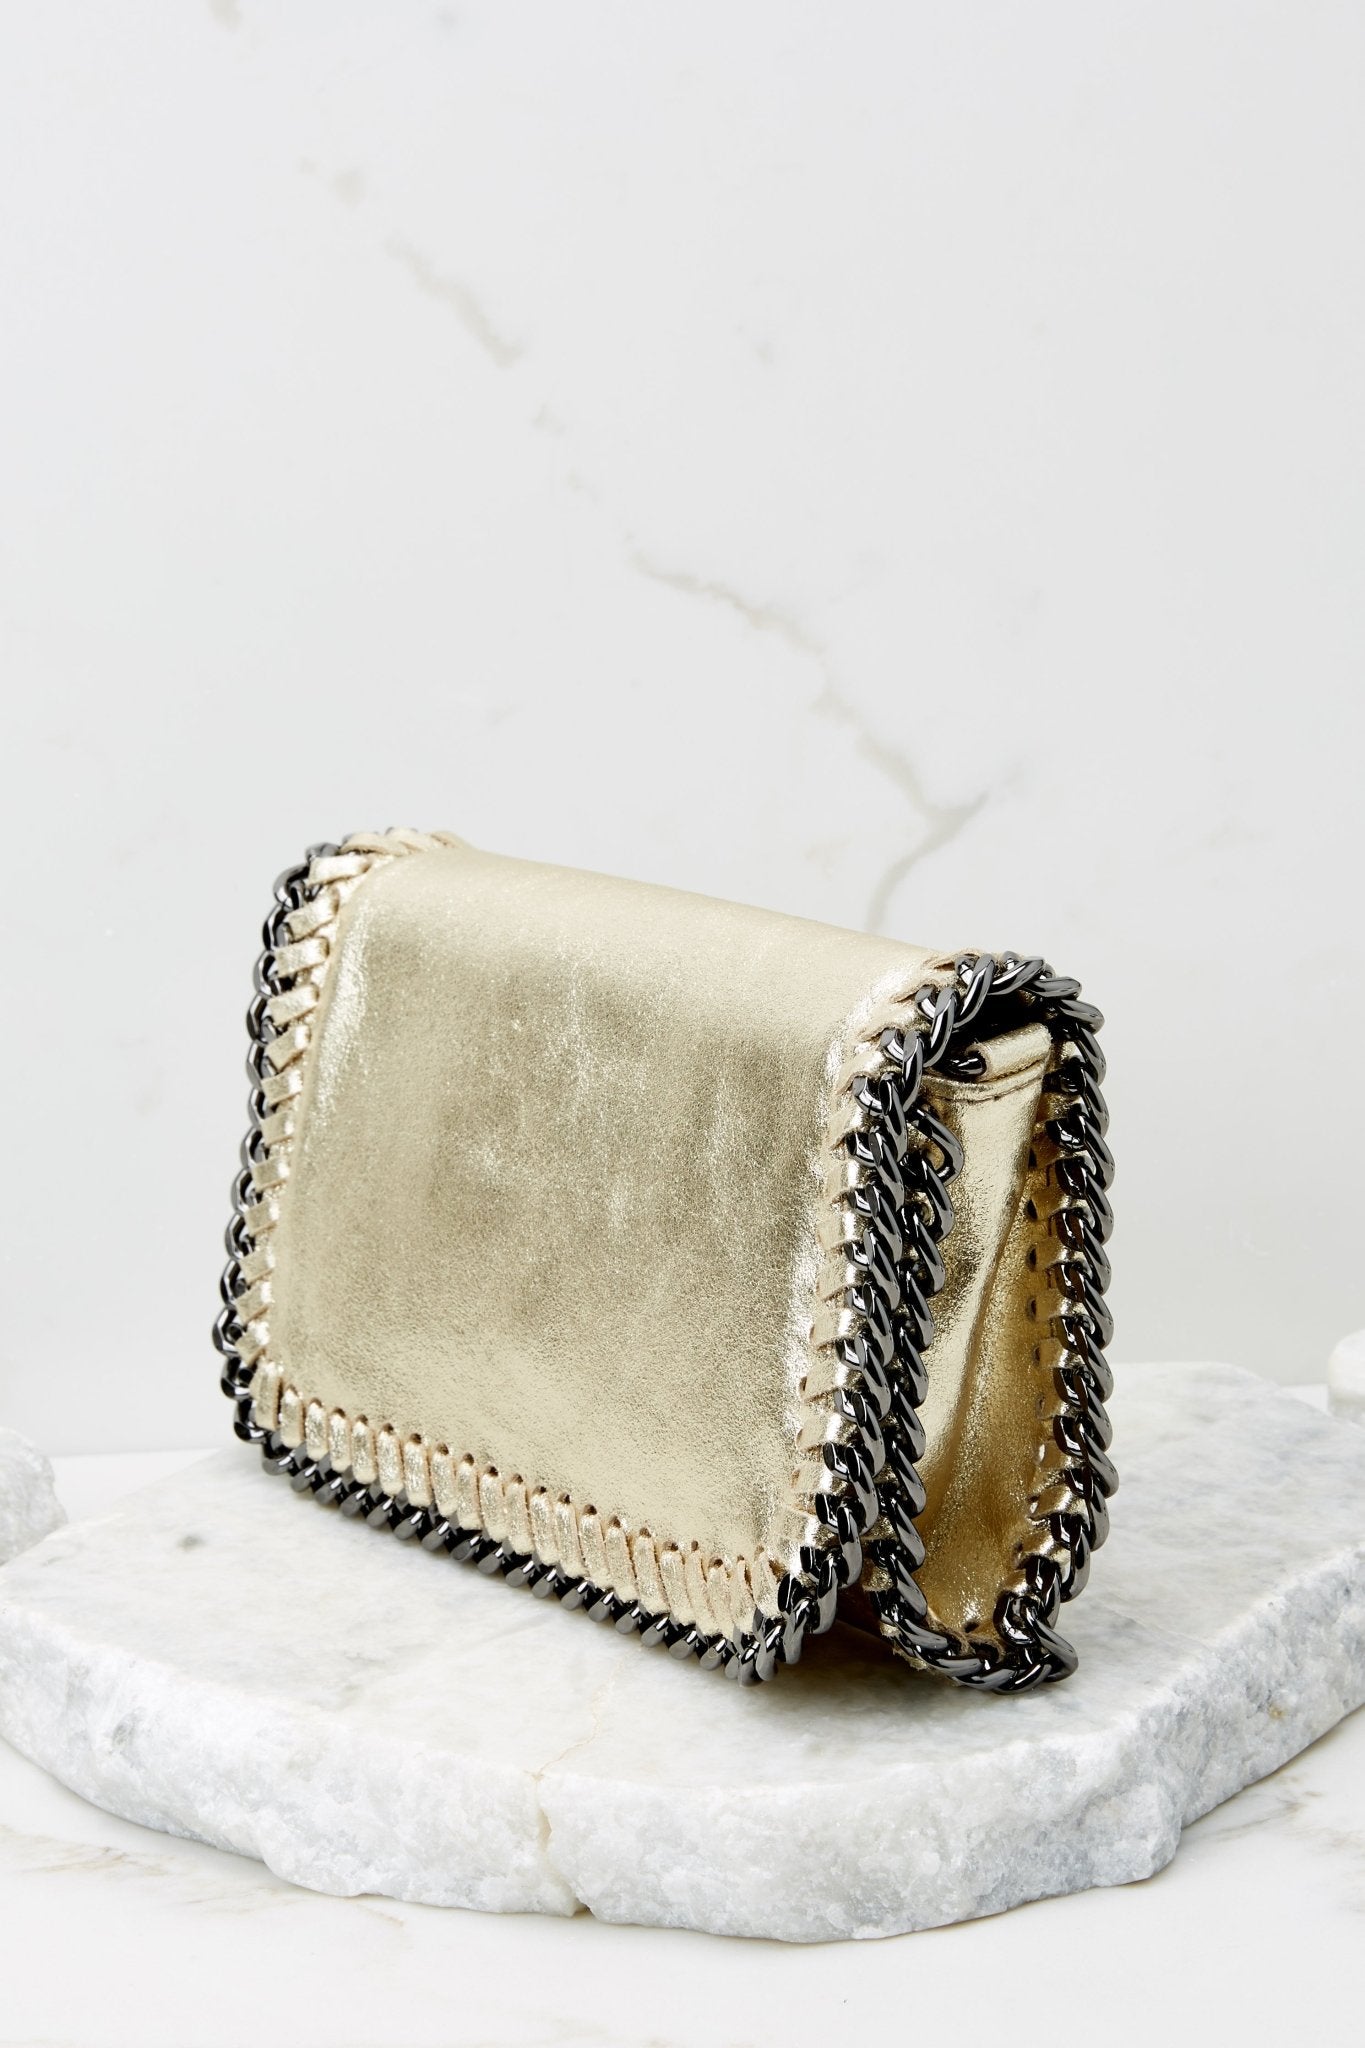 Angled side view of this clutch that features a front flap that has a silver magnetic closure, an inside zipper, a removable leather strap, and wide decorative stitching around the edges.